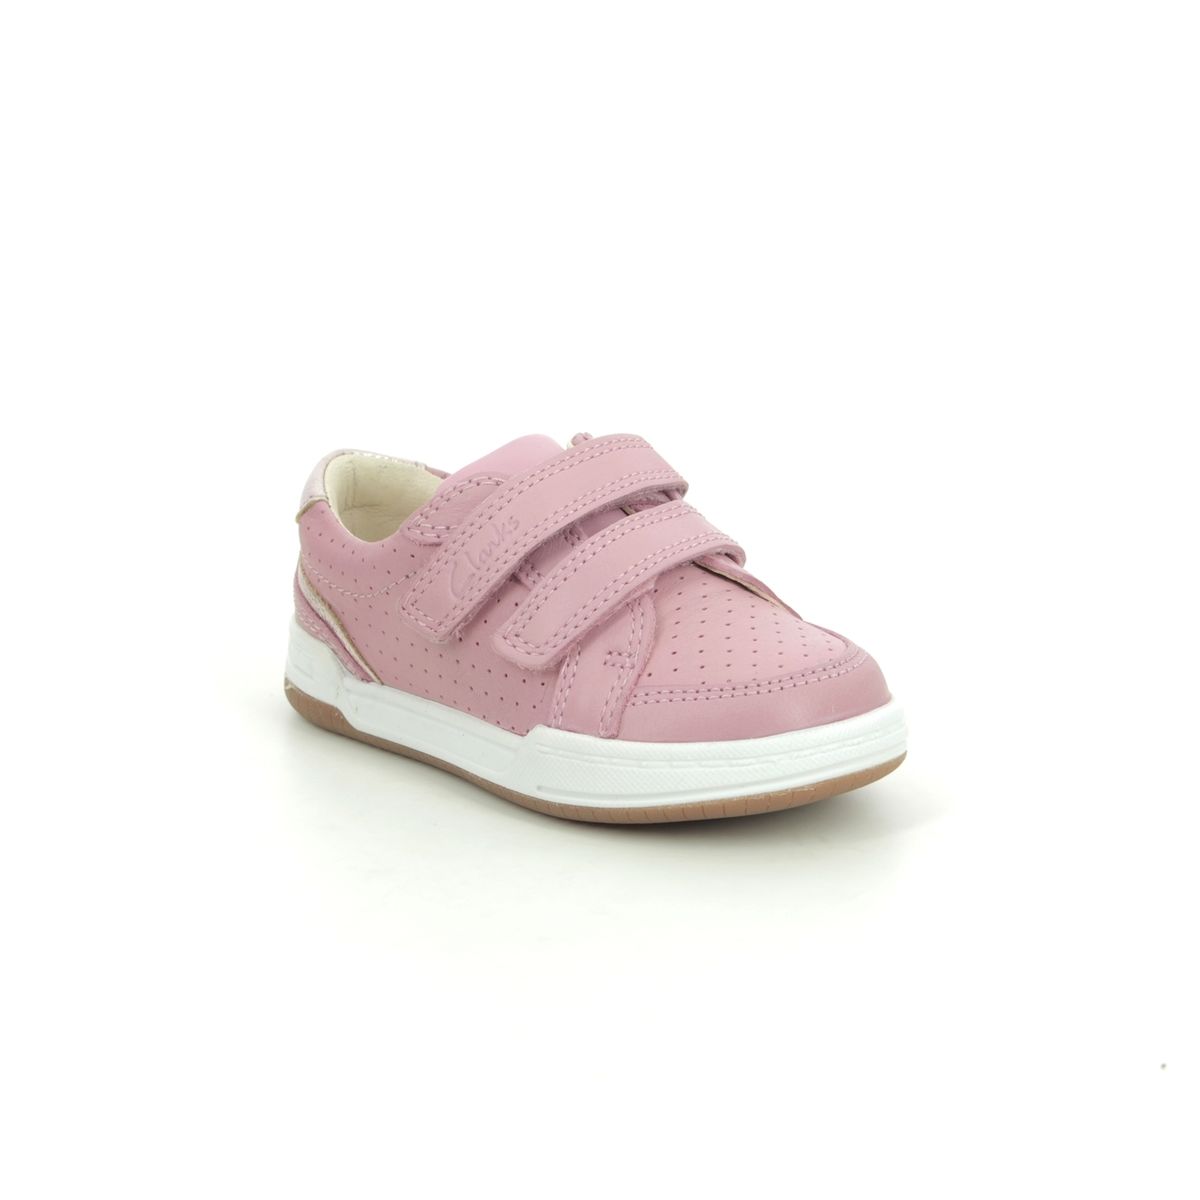 Clarks Fawn Solo T Pink Leather Kids First And Toddler 589895E In Size 9.5 In Plain Pink Leather E Width Fitting Narrow Fit For kids